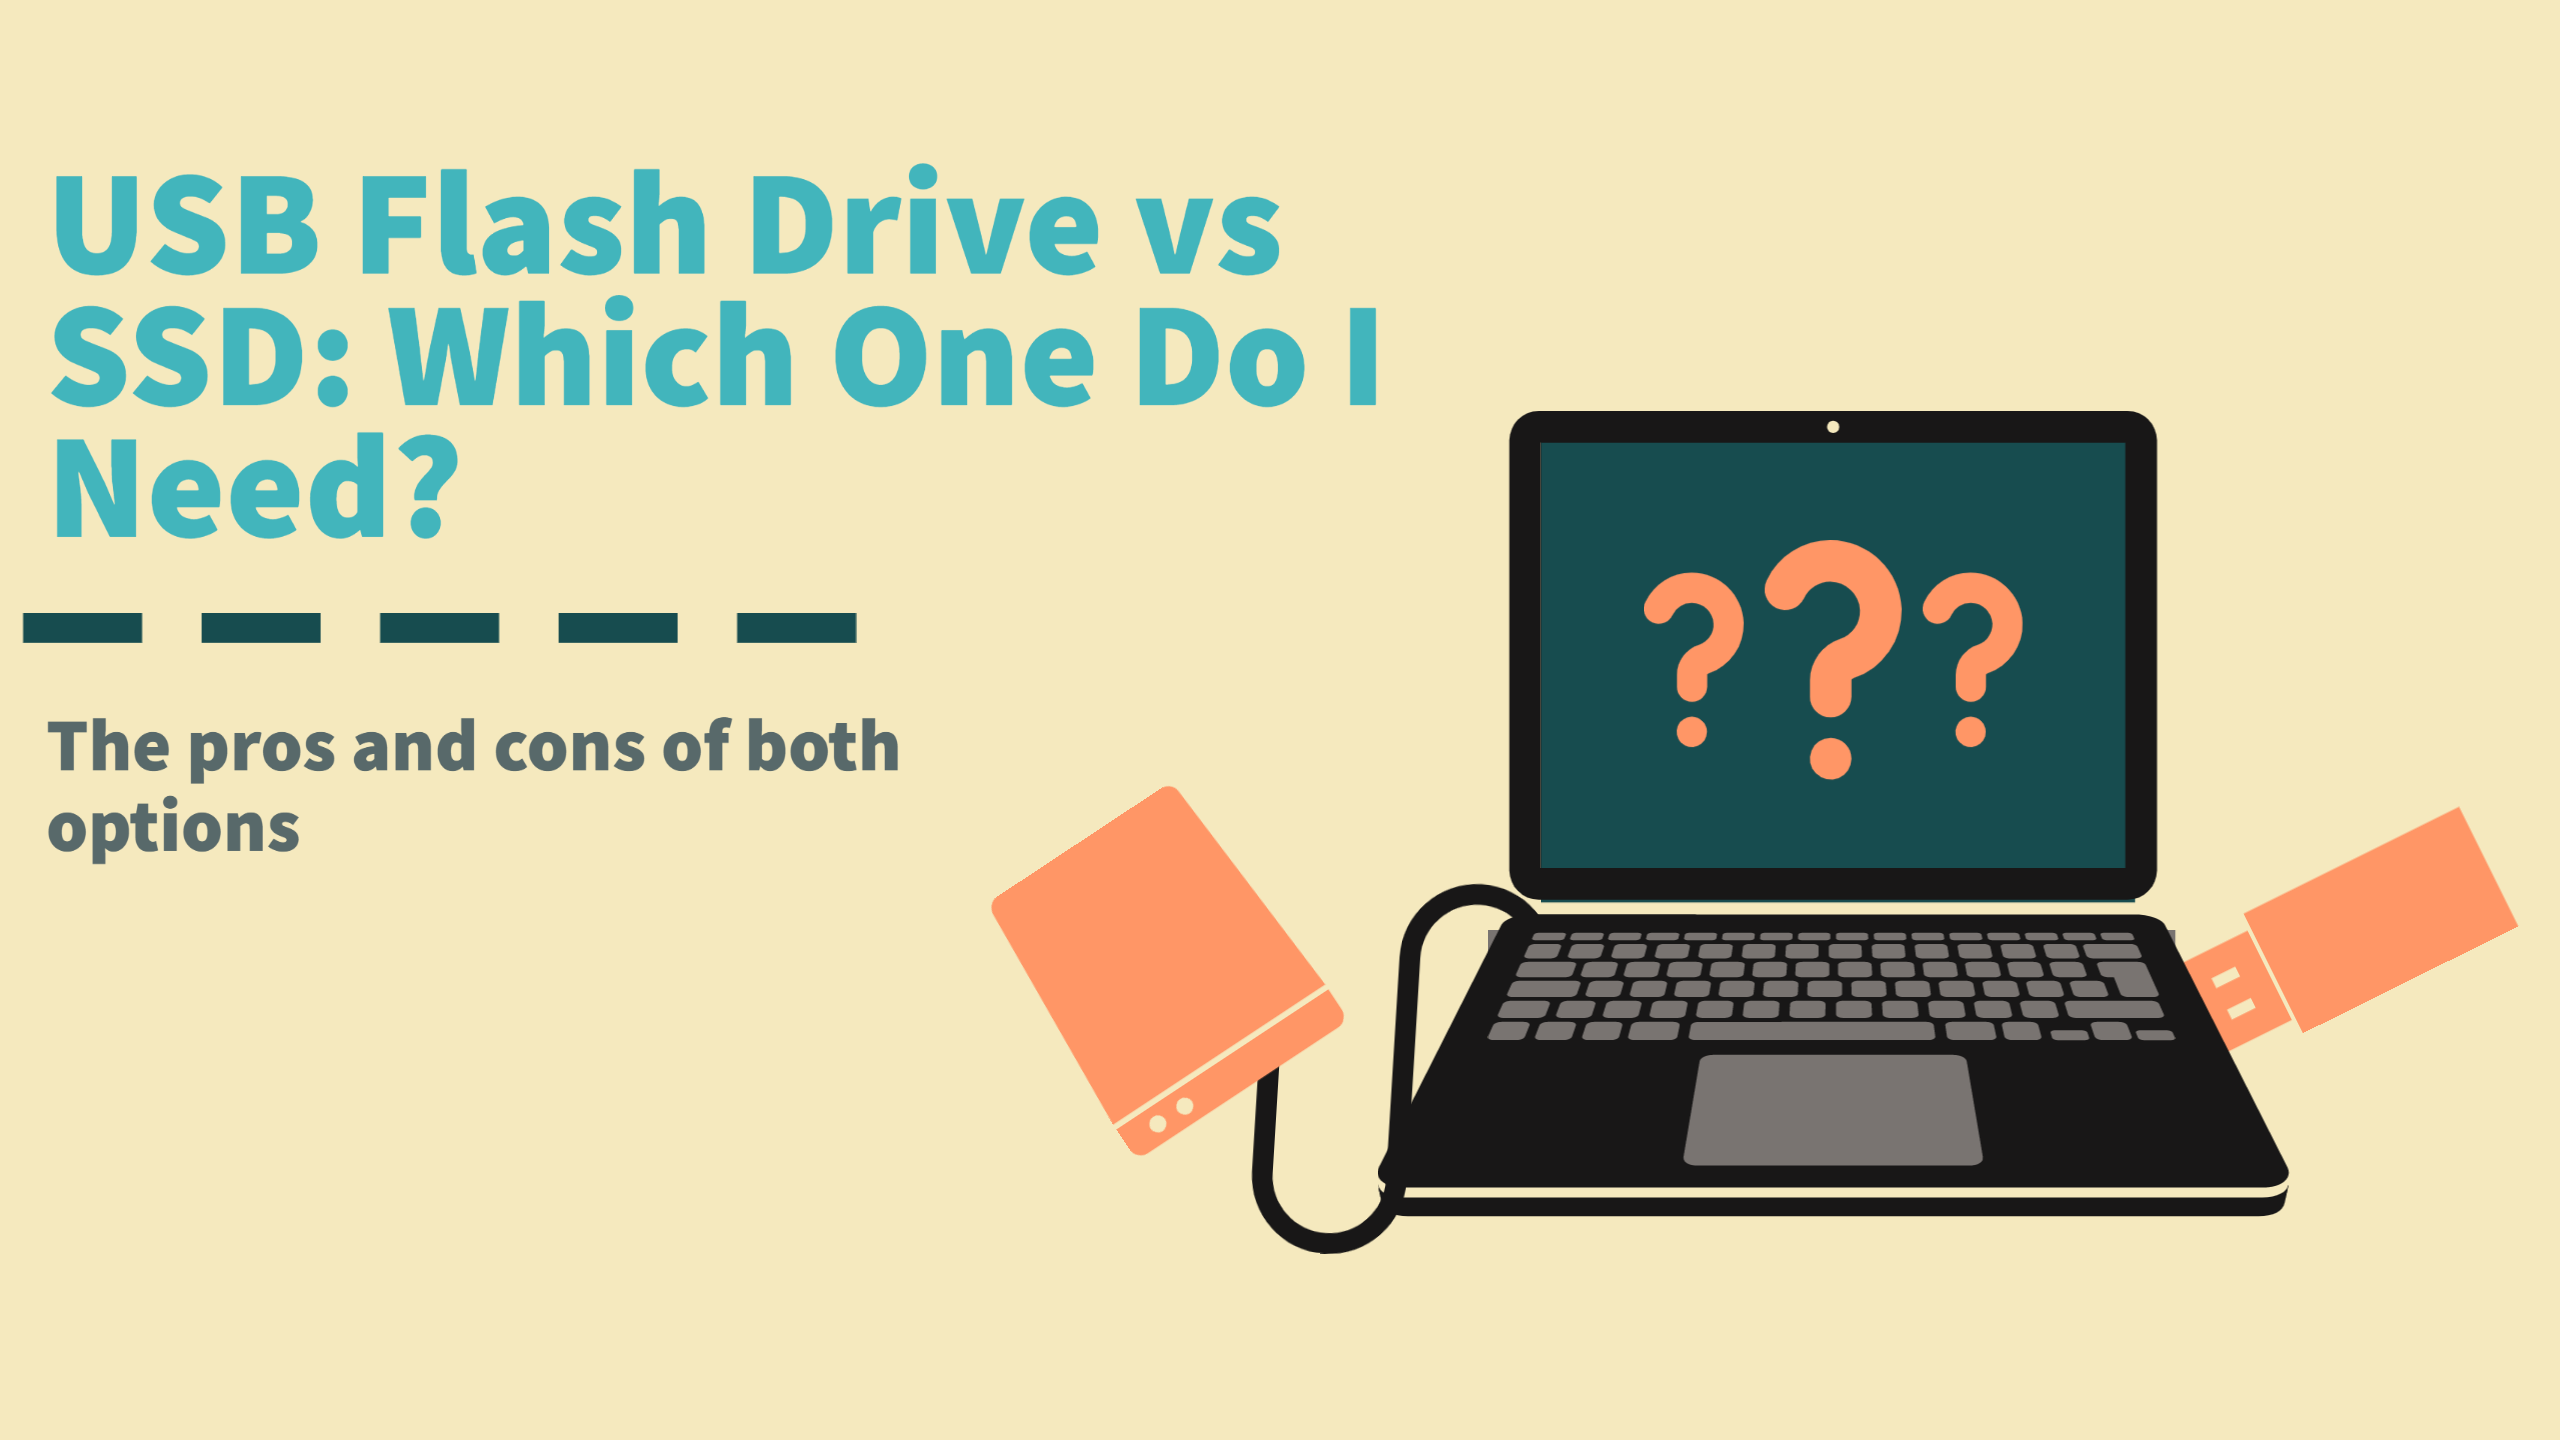 USB Flash Drive vs SSD: Which One Do I Need